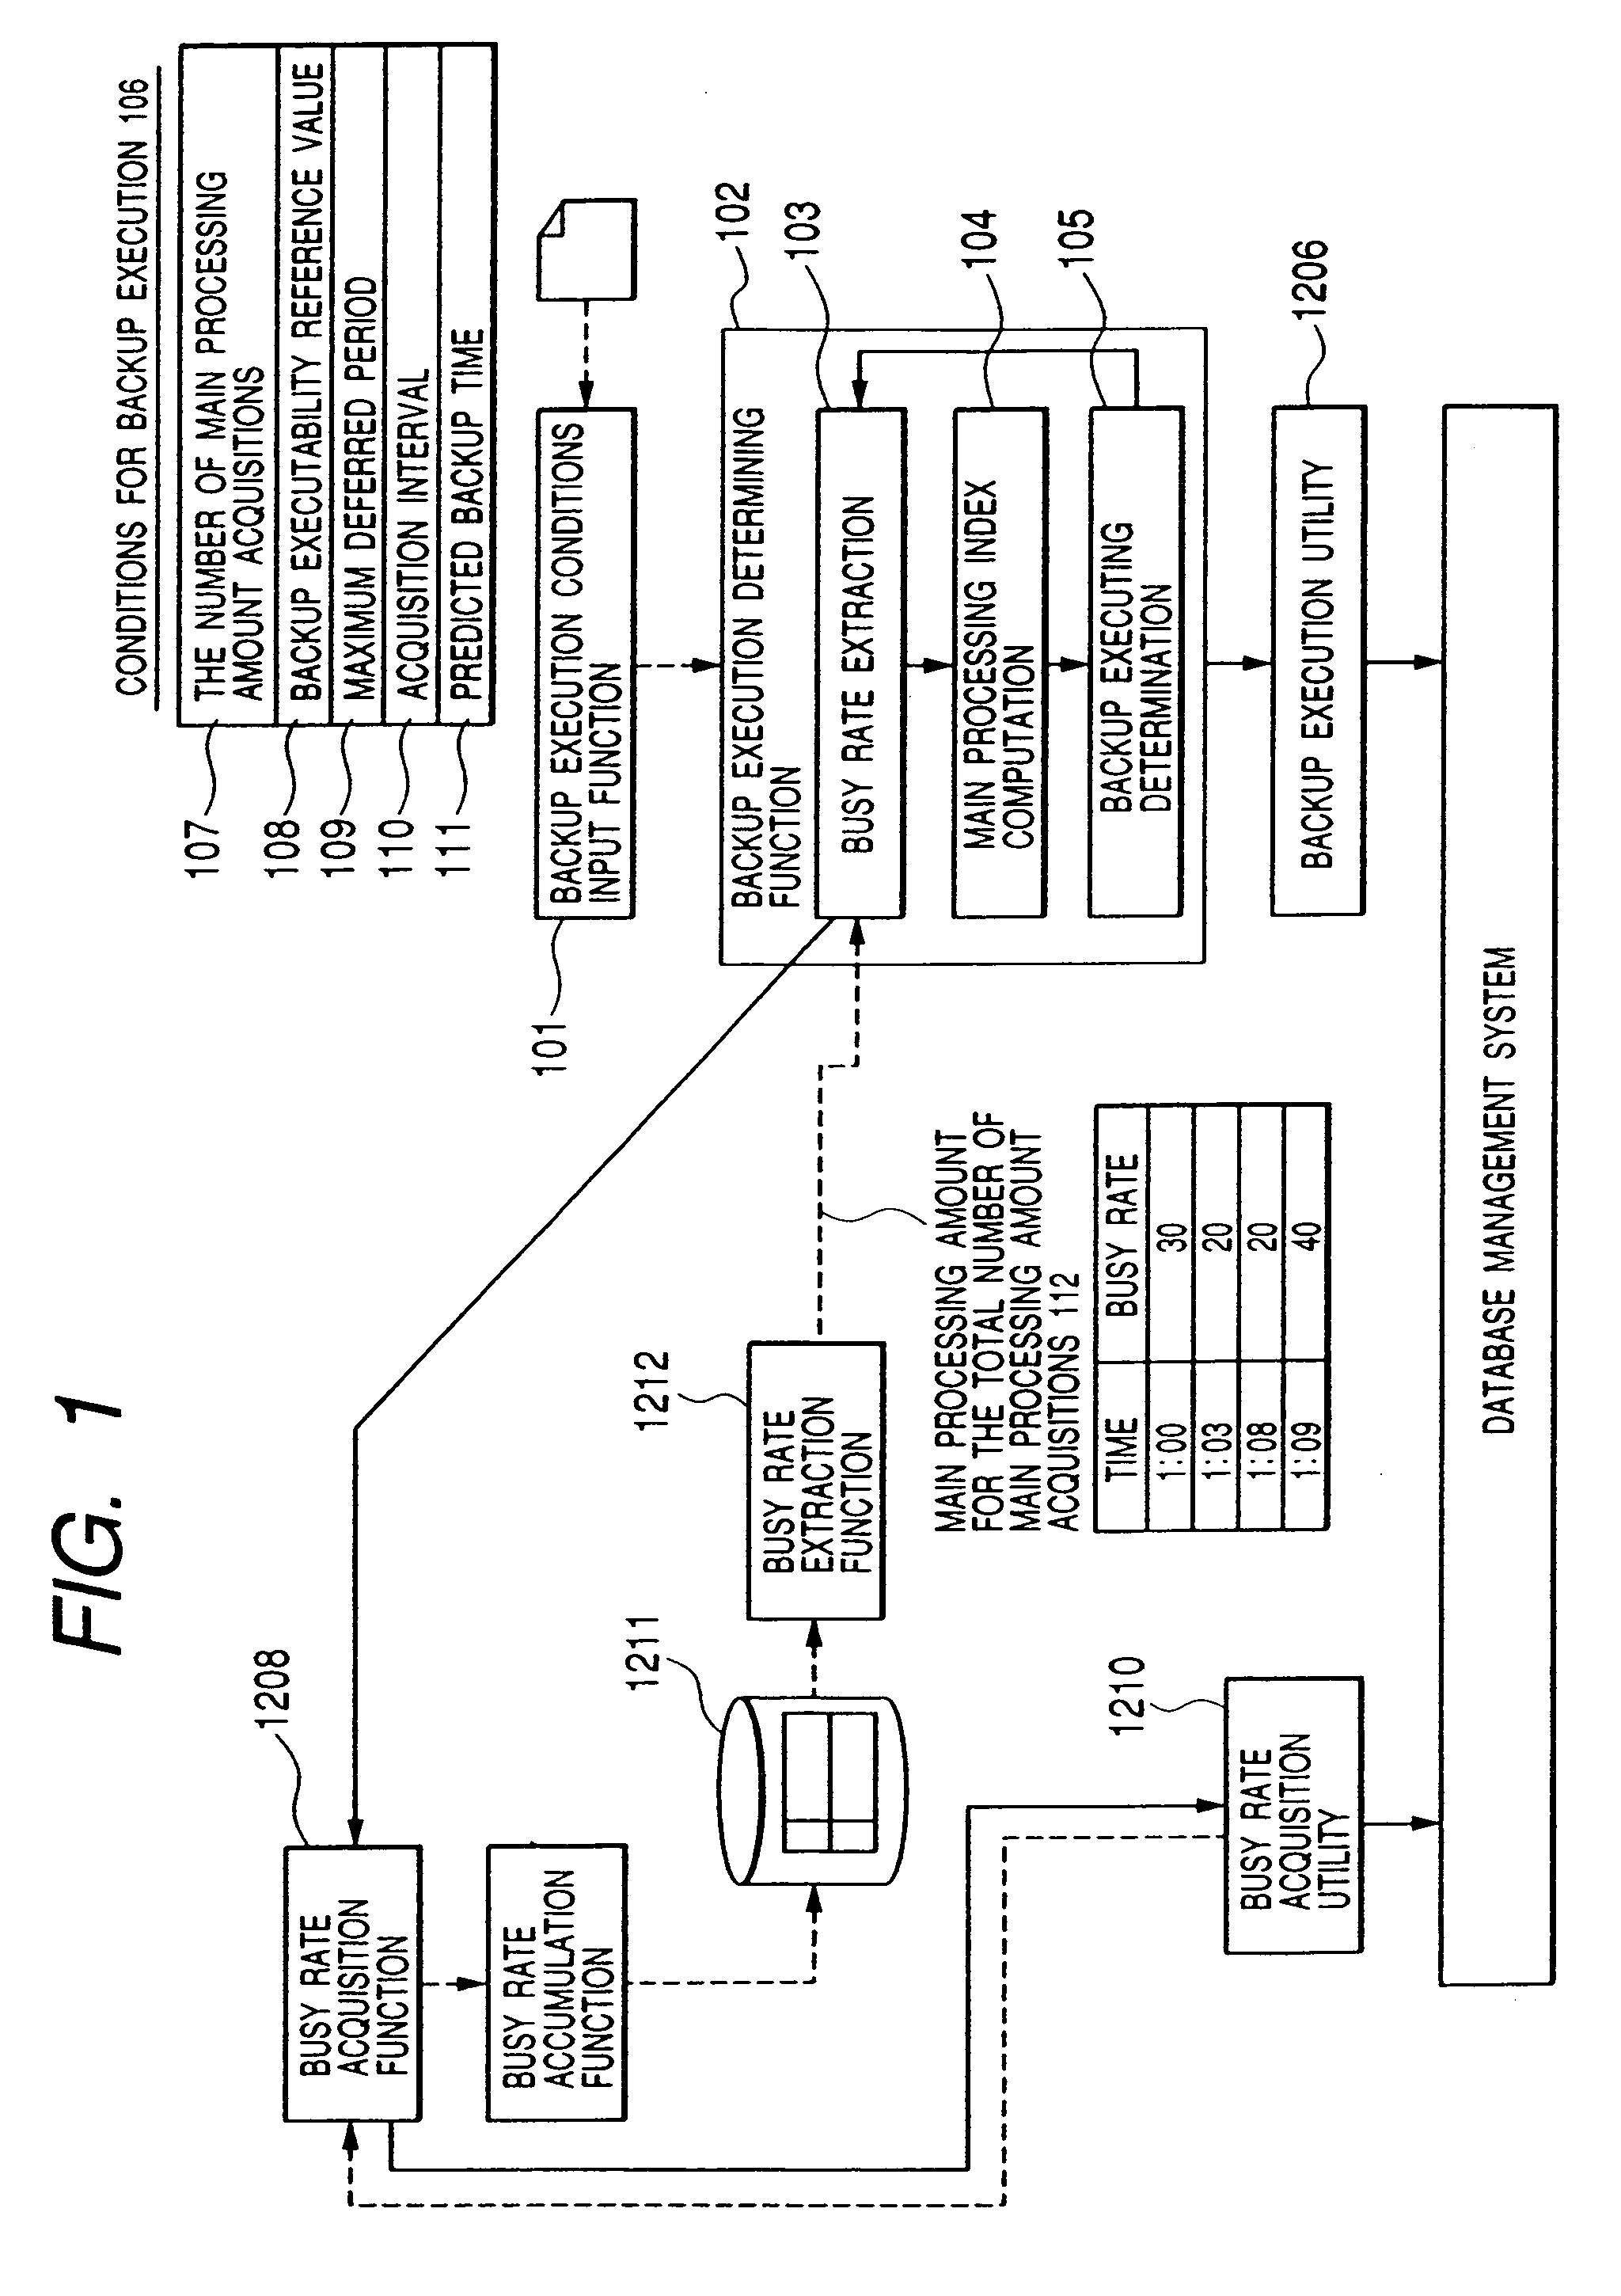 Method for determining execution of backup on a database